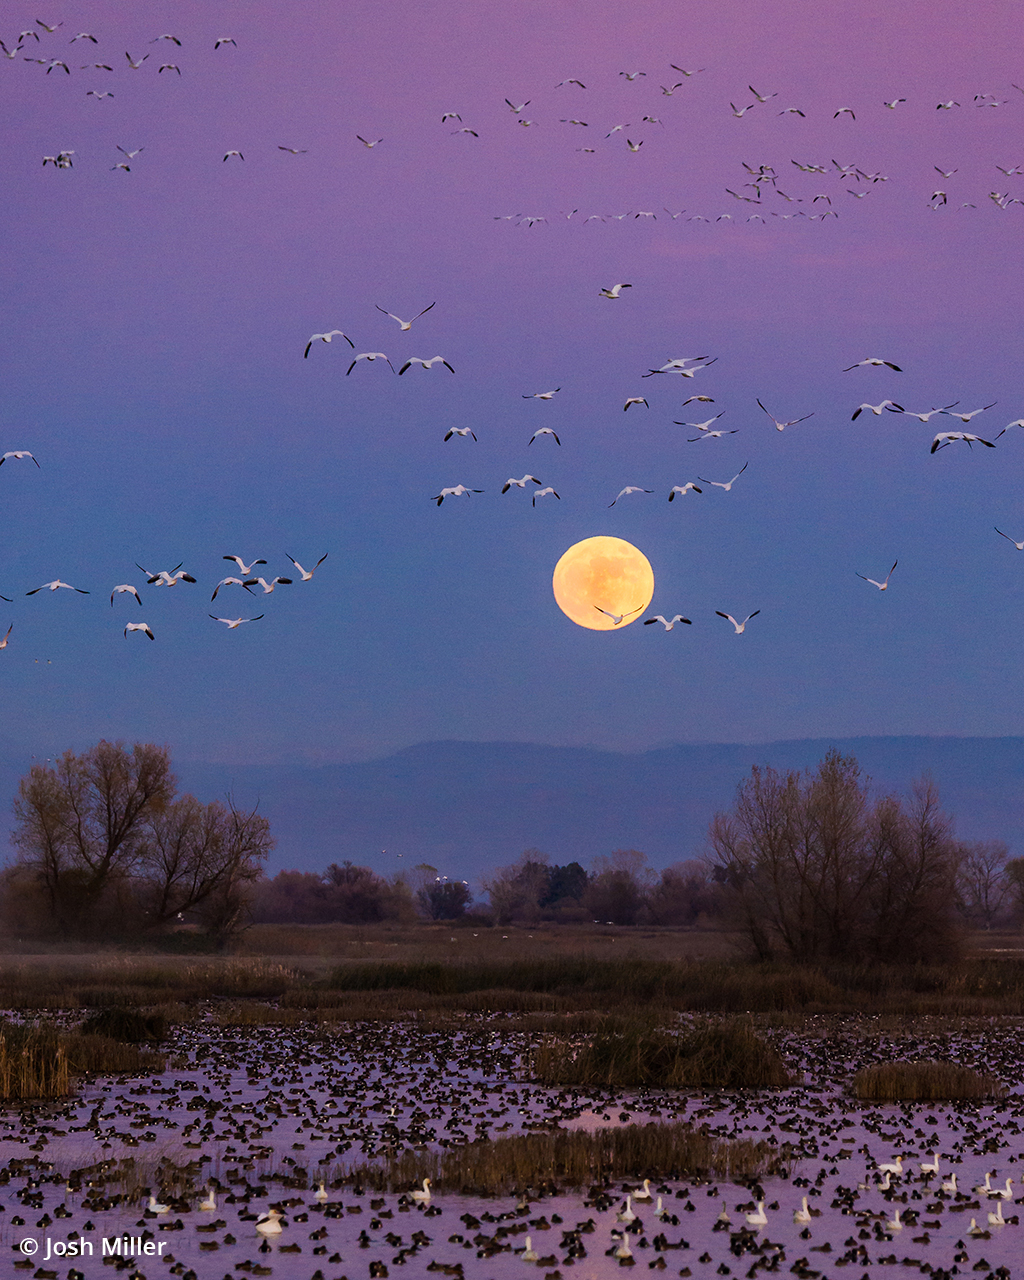 Photo of migrating birds with the moon in the sky.